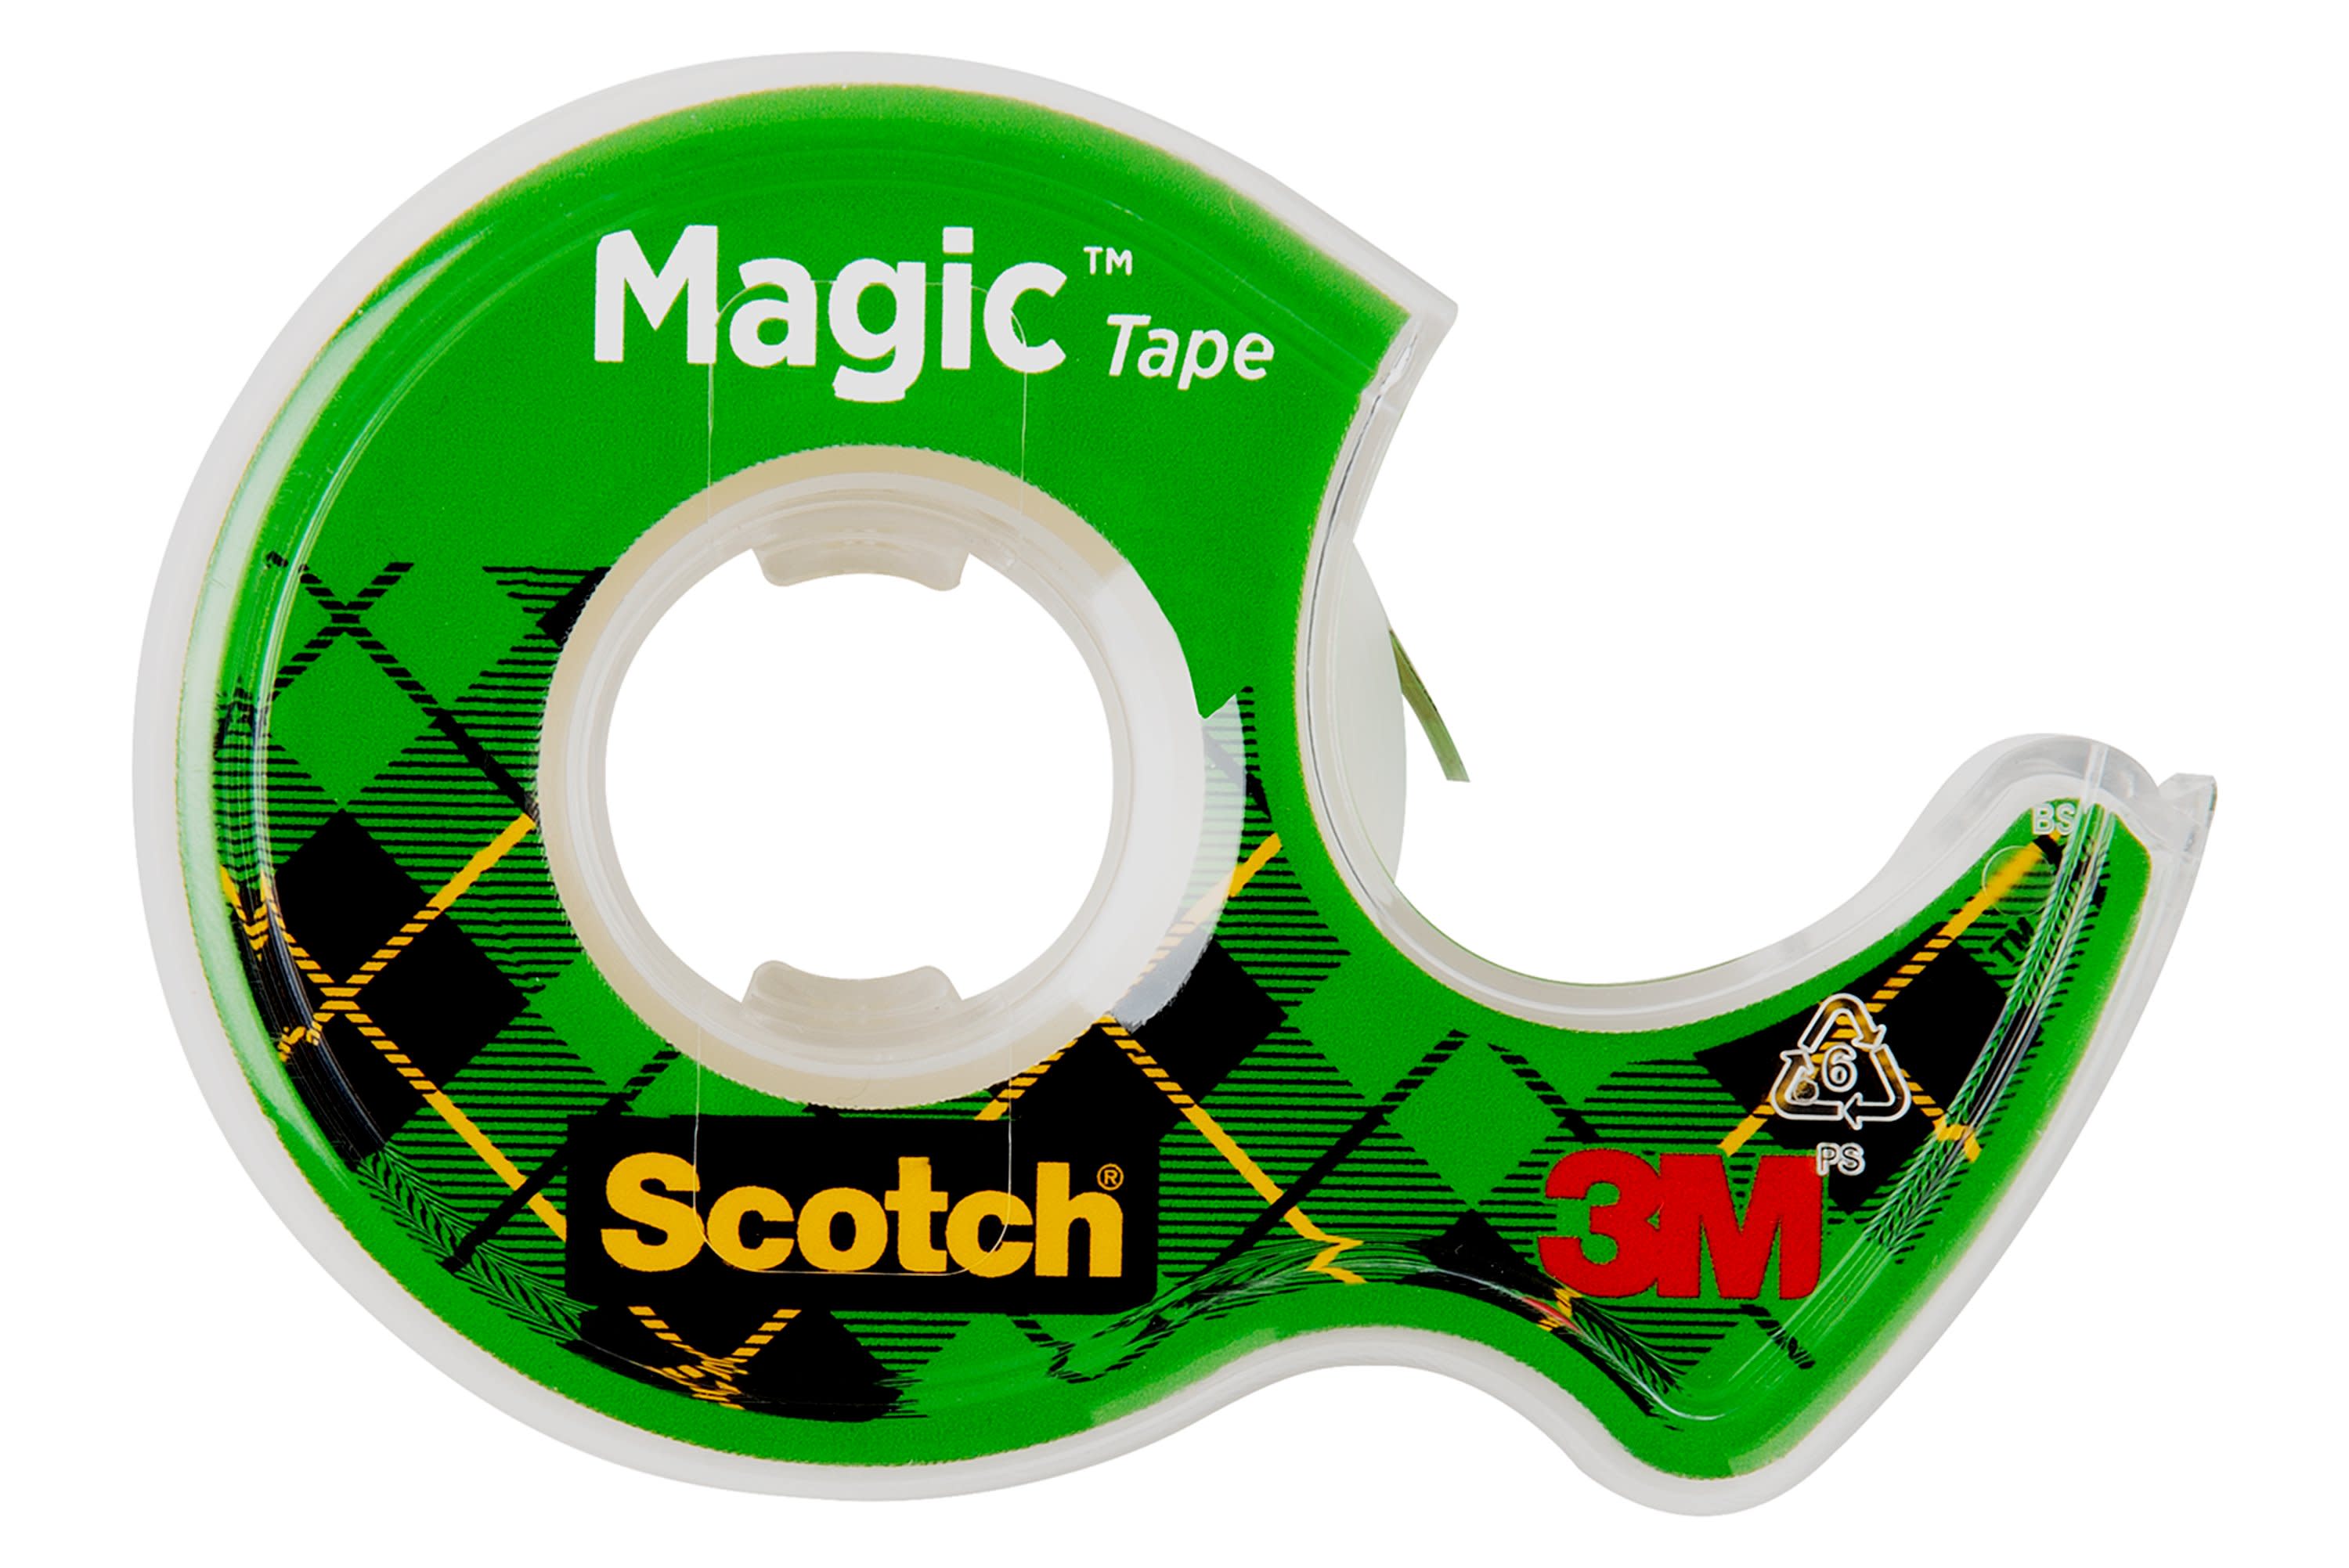 Scotch Magic Tape, Invisible, 4 Tape Rolls With Dispensers - image 3 of 12